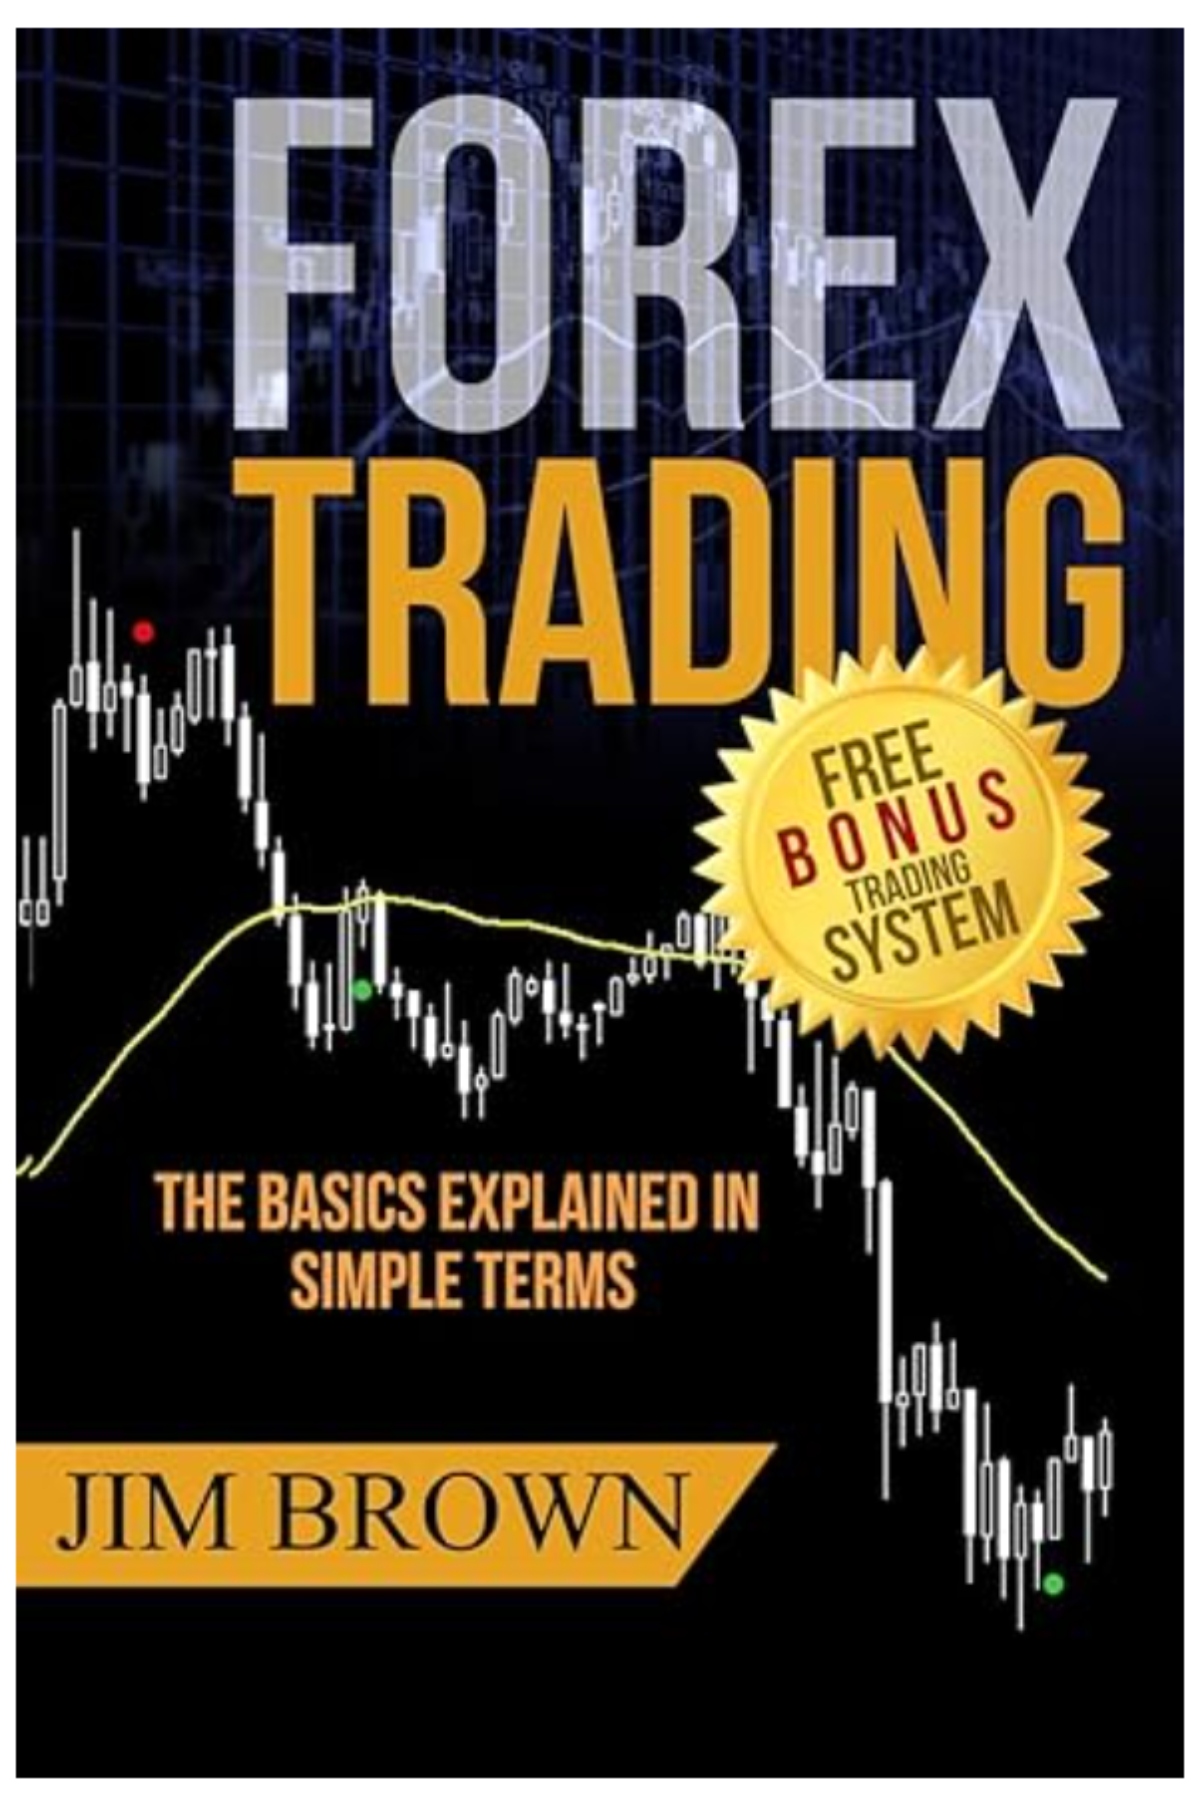 The best forex trading book